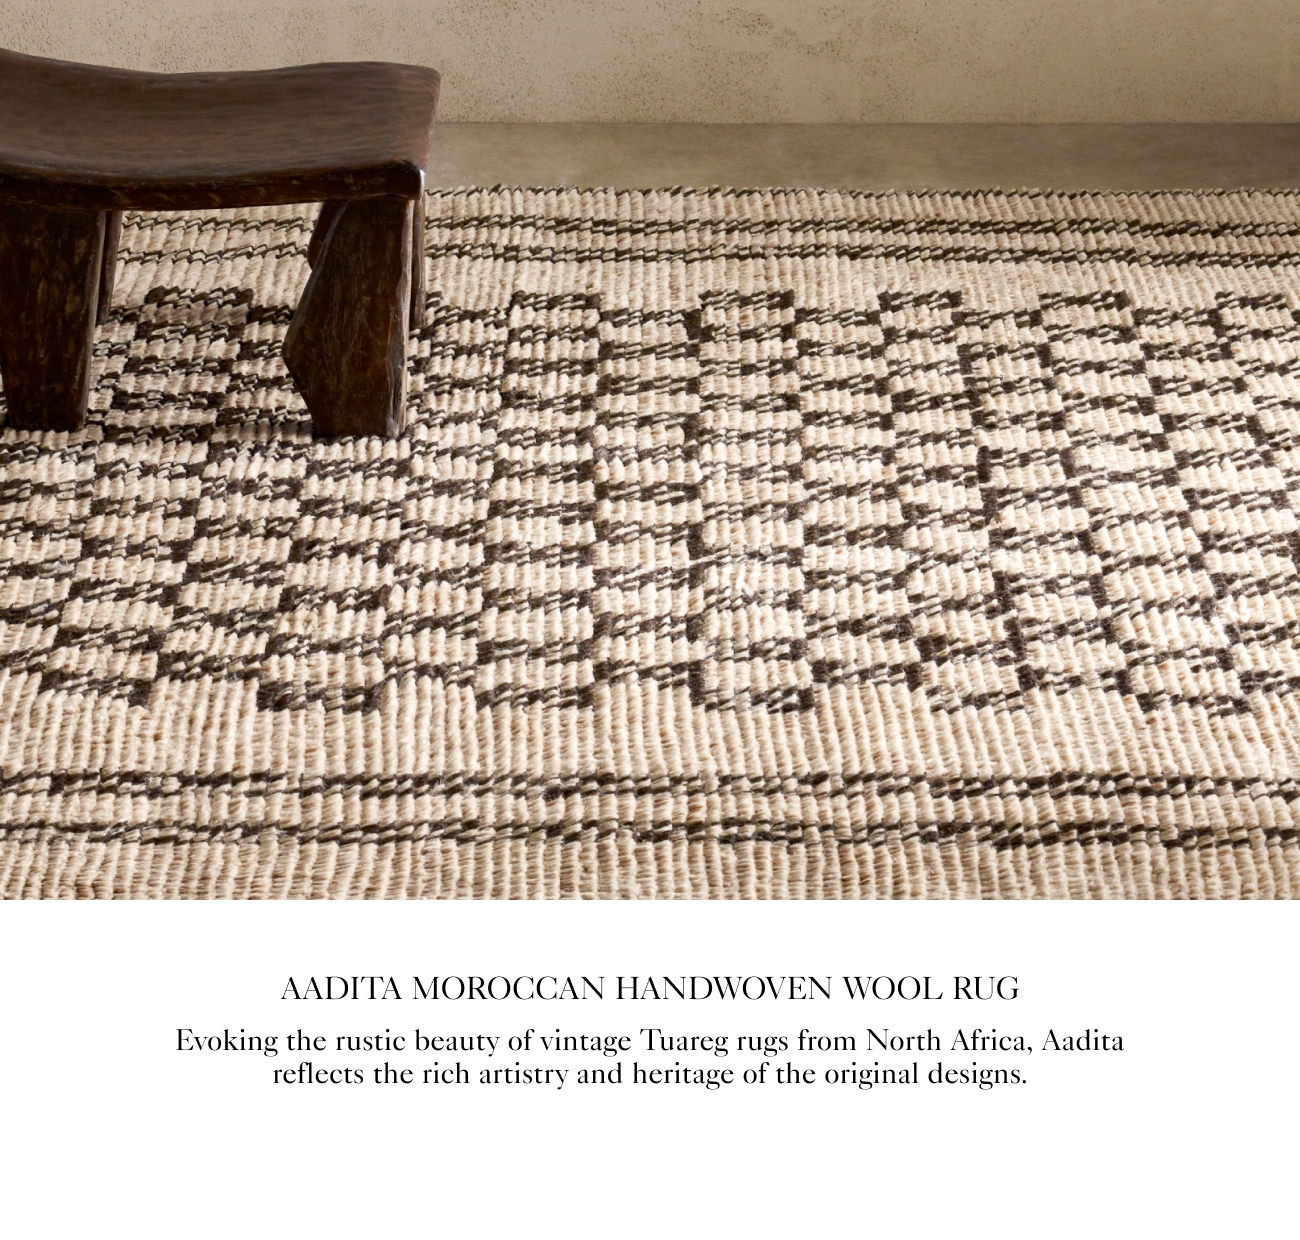  AADITA MOROCCAN HANDWOVEN WOOL RUG Evoking the rustic beauty of vintage Tuareg rugs from North Africa, Aadita reflects the rich artistry and heritage of the original designs. 